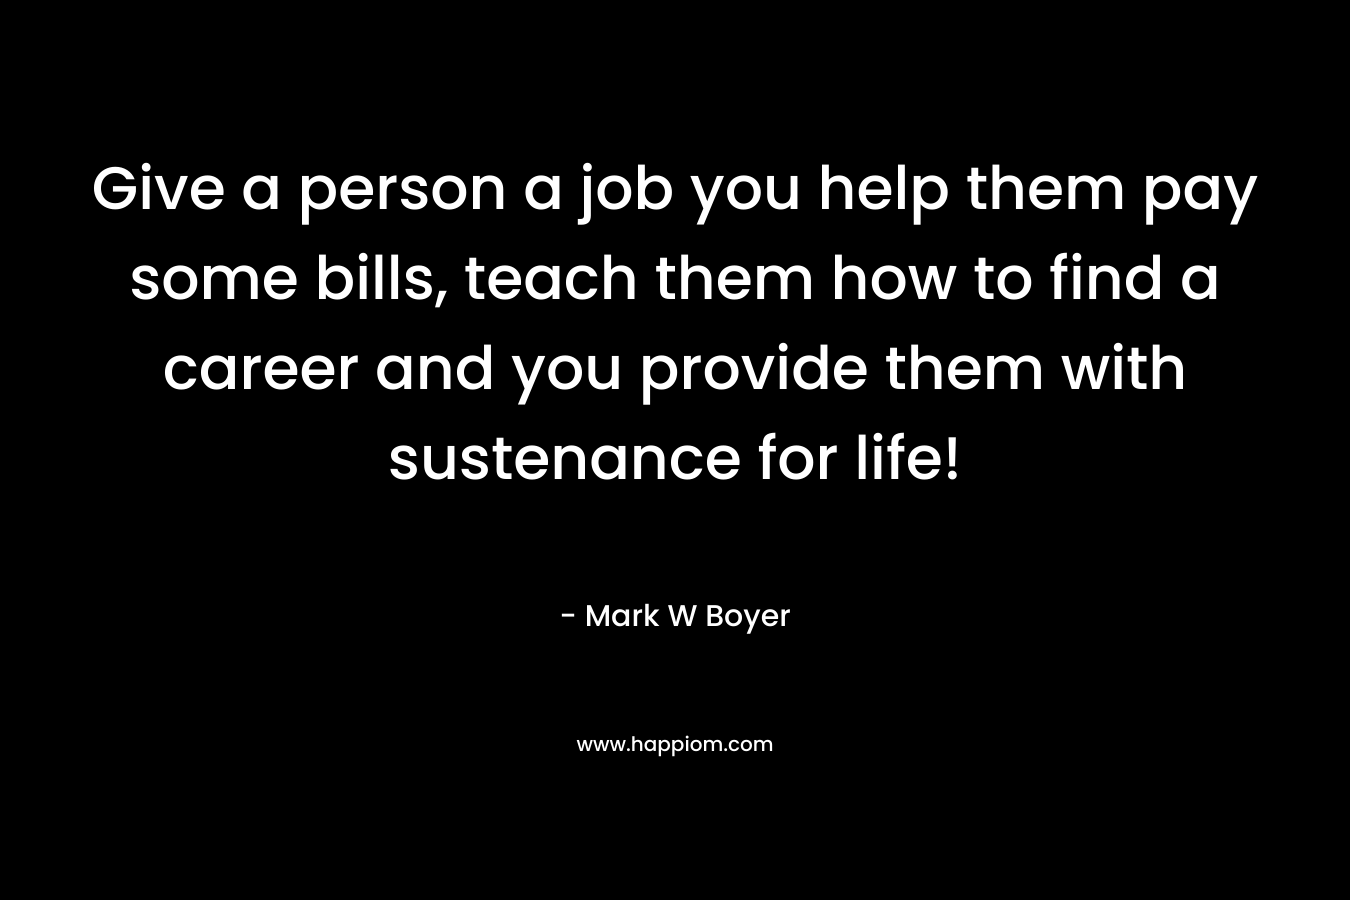 Give a person a job you help them pay some bills, teach them how to find a career and you provide them with sustenance for life!